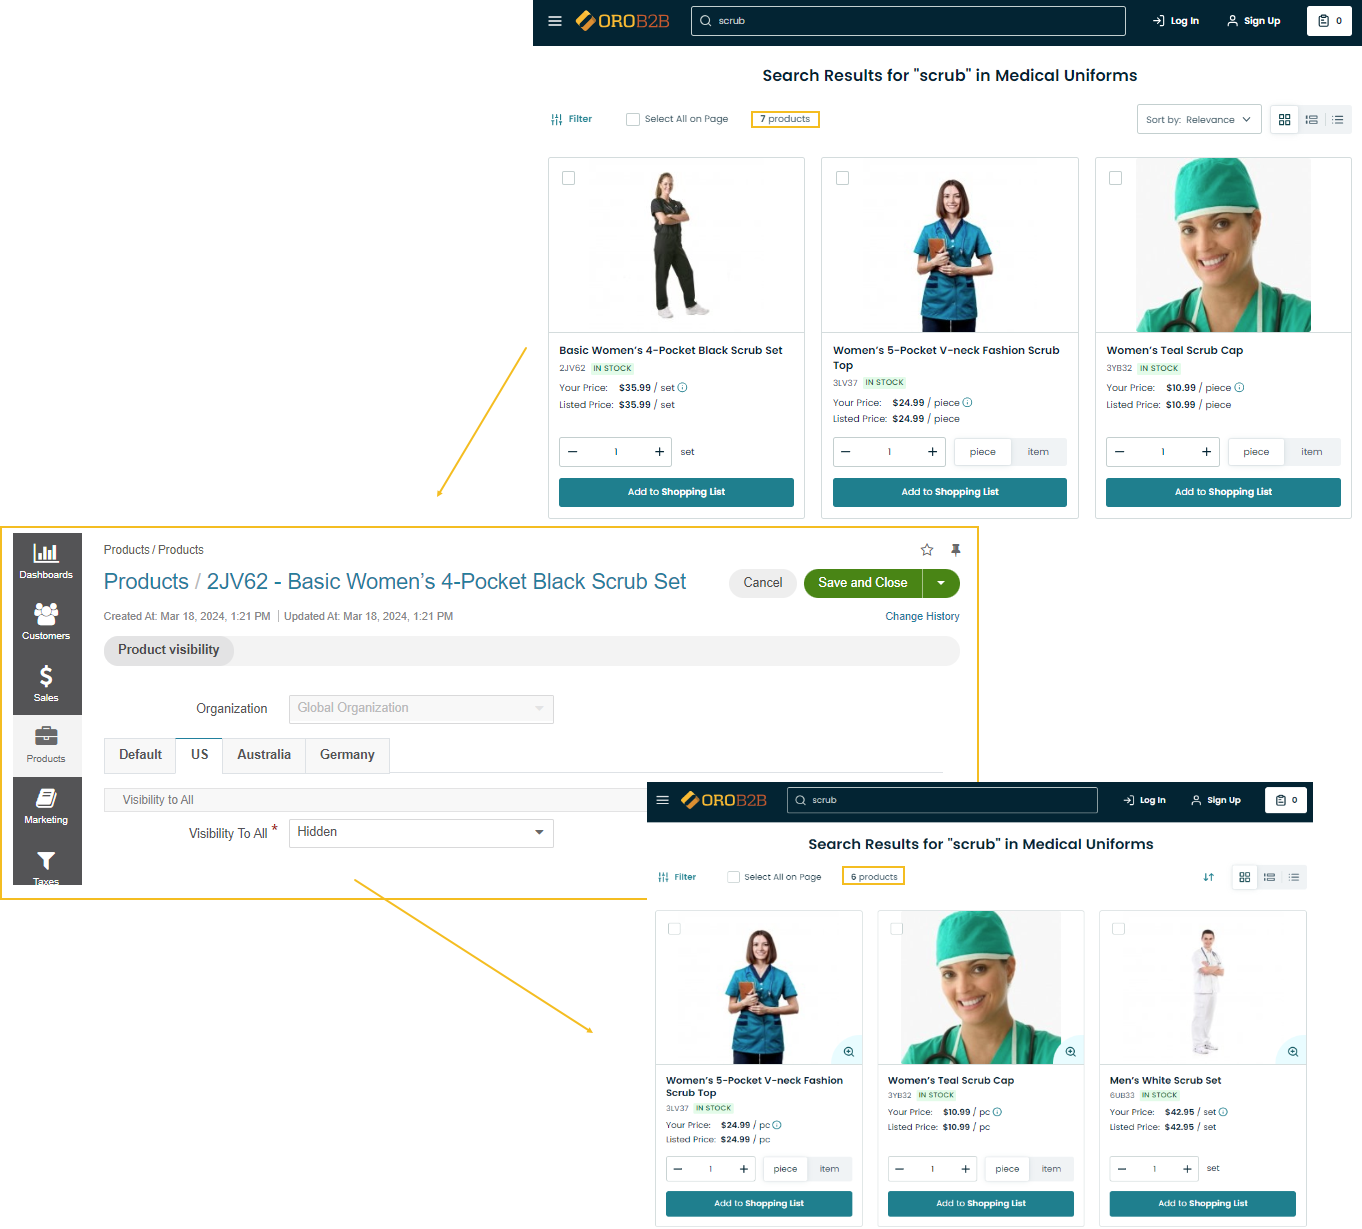 Illustrate products visibility on different websites